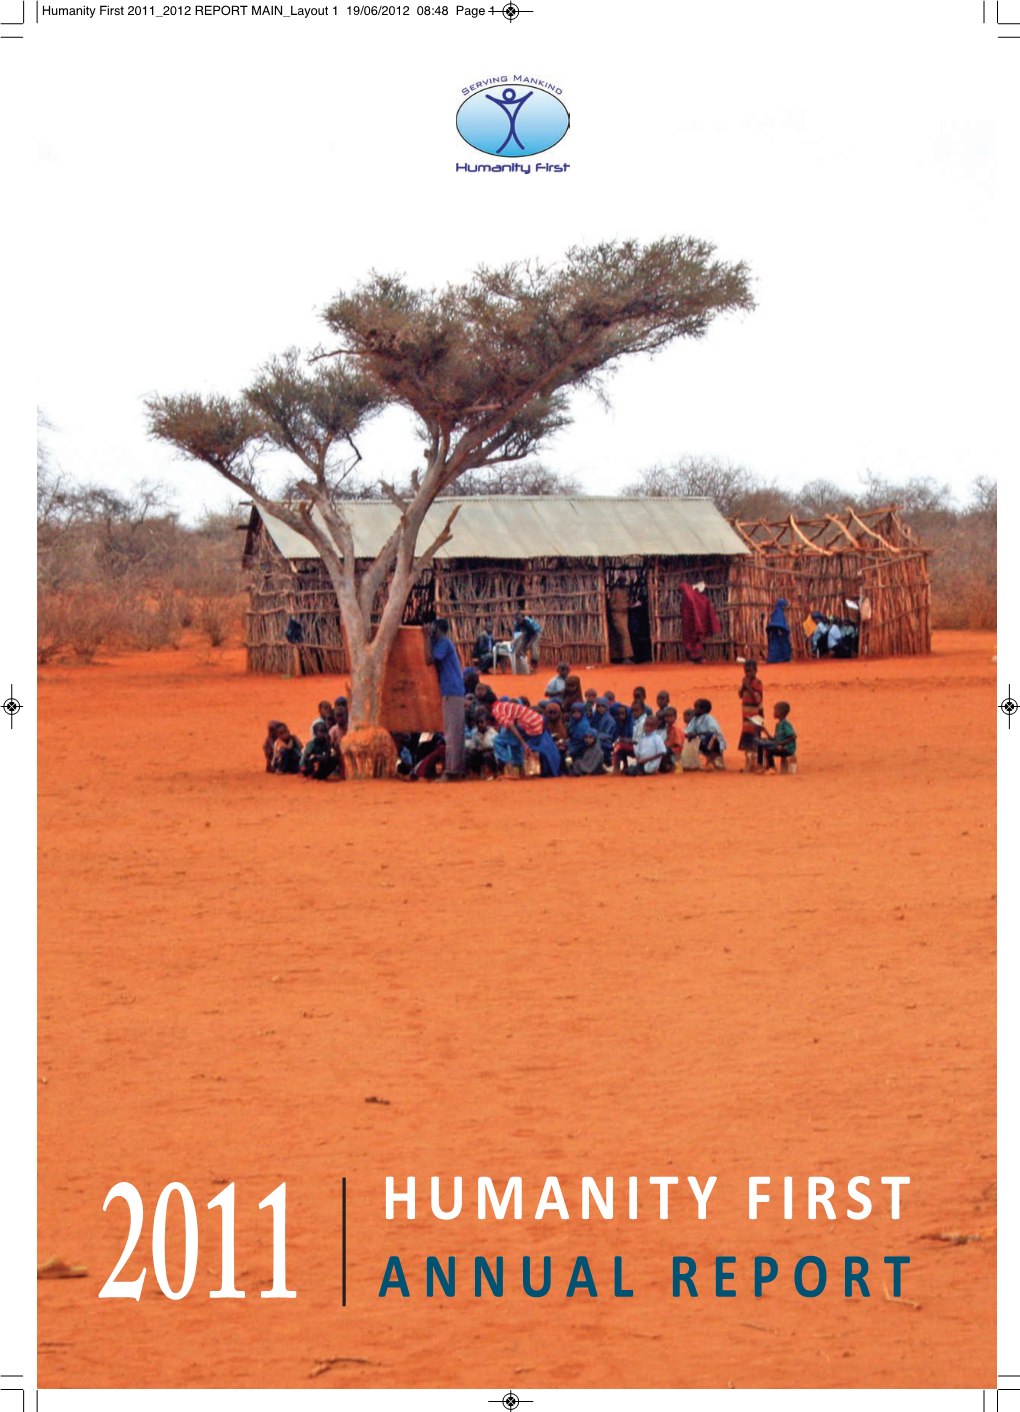 Annual Report 2011 Humanity First 2011 2012 REPORT MAIN Layout 1 19/06/2012 08:48 Page 3